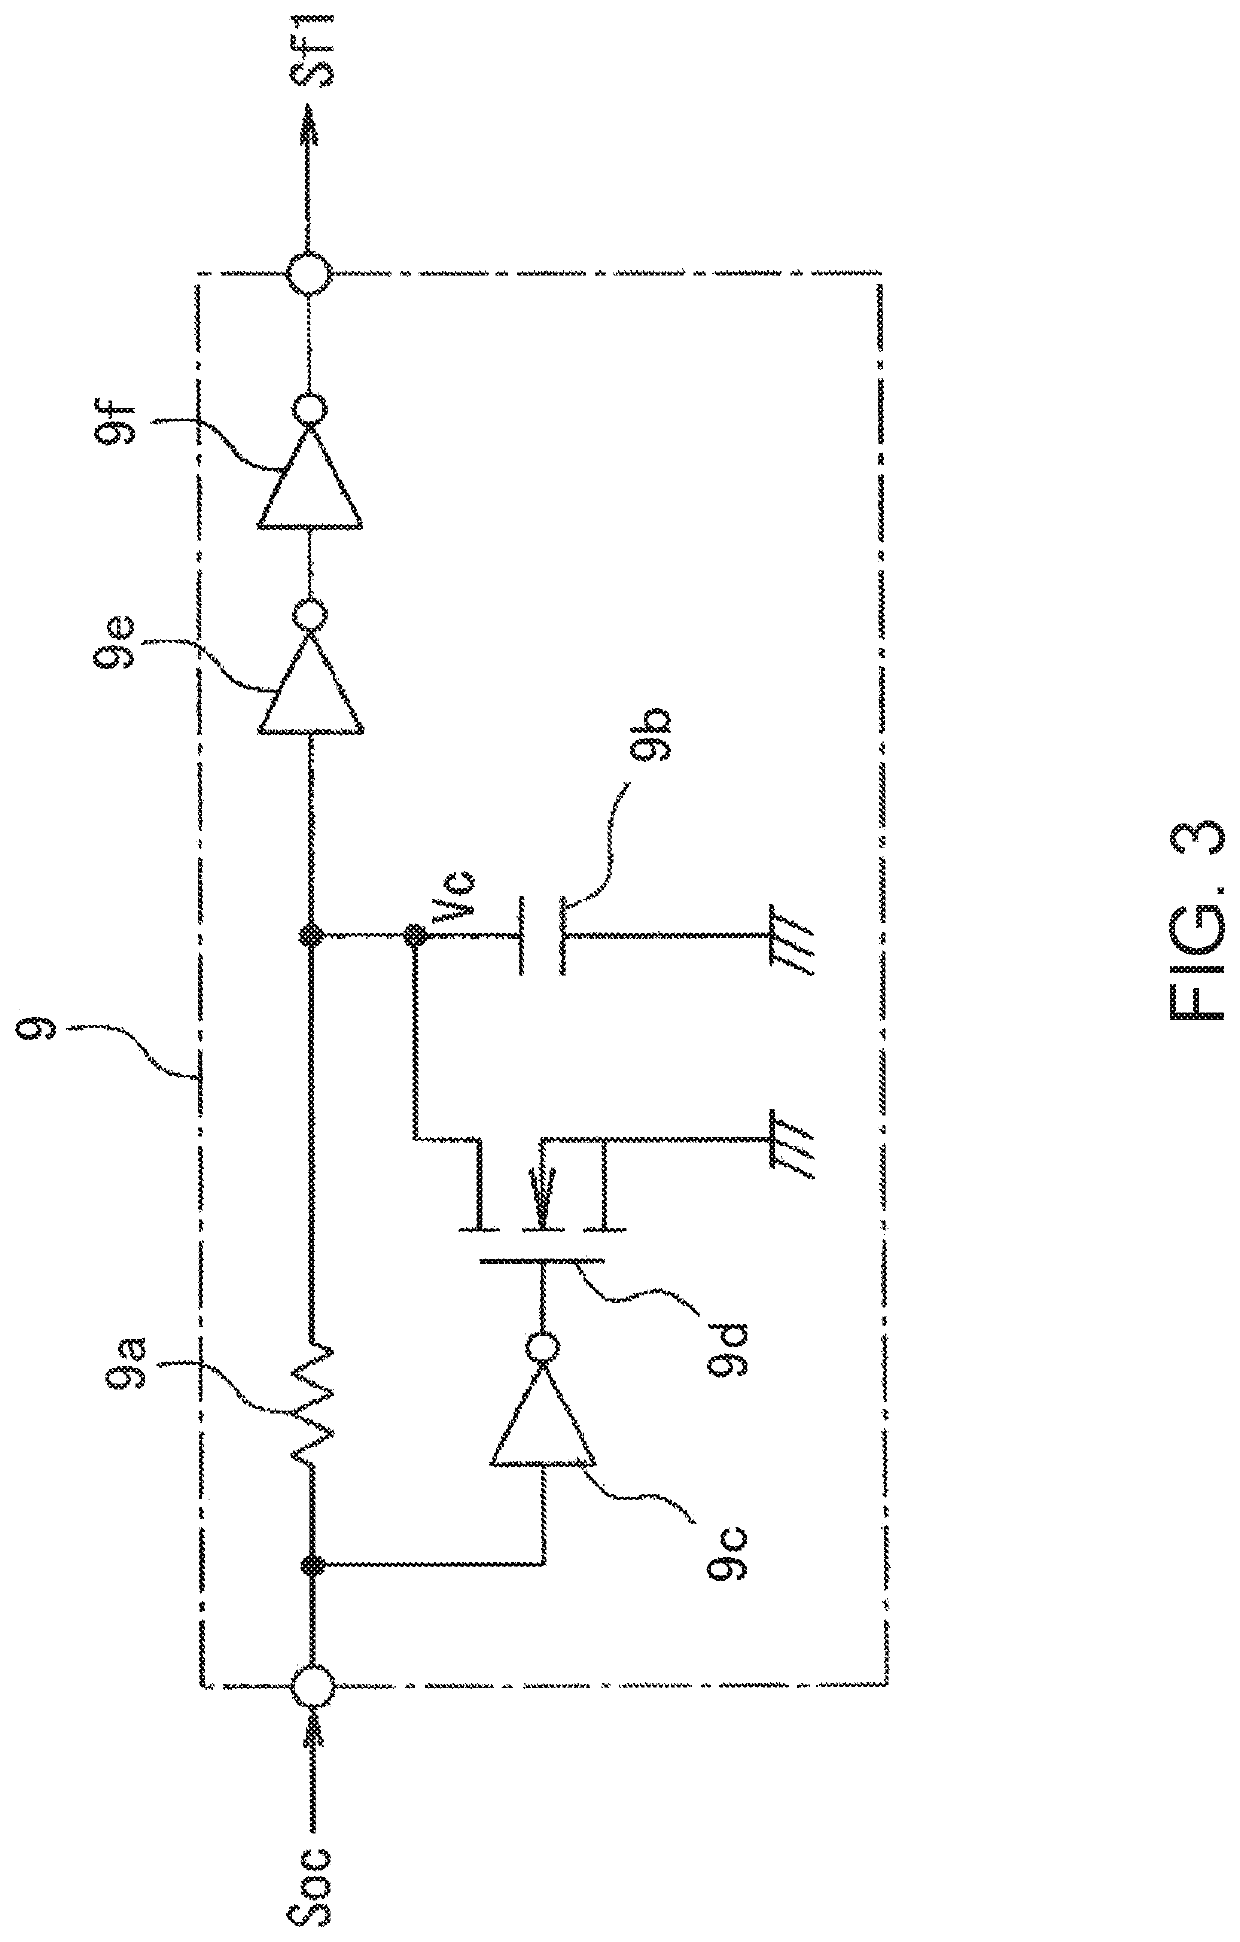 Semiconductor device driving device